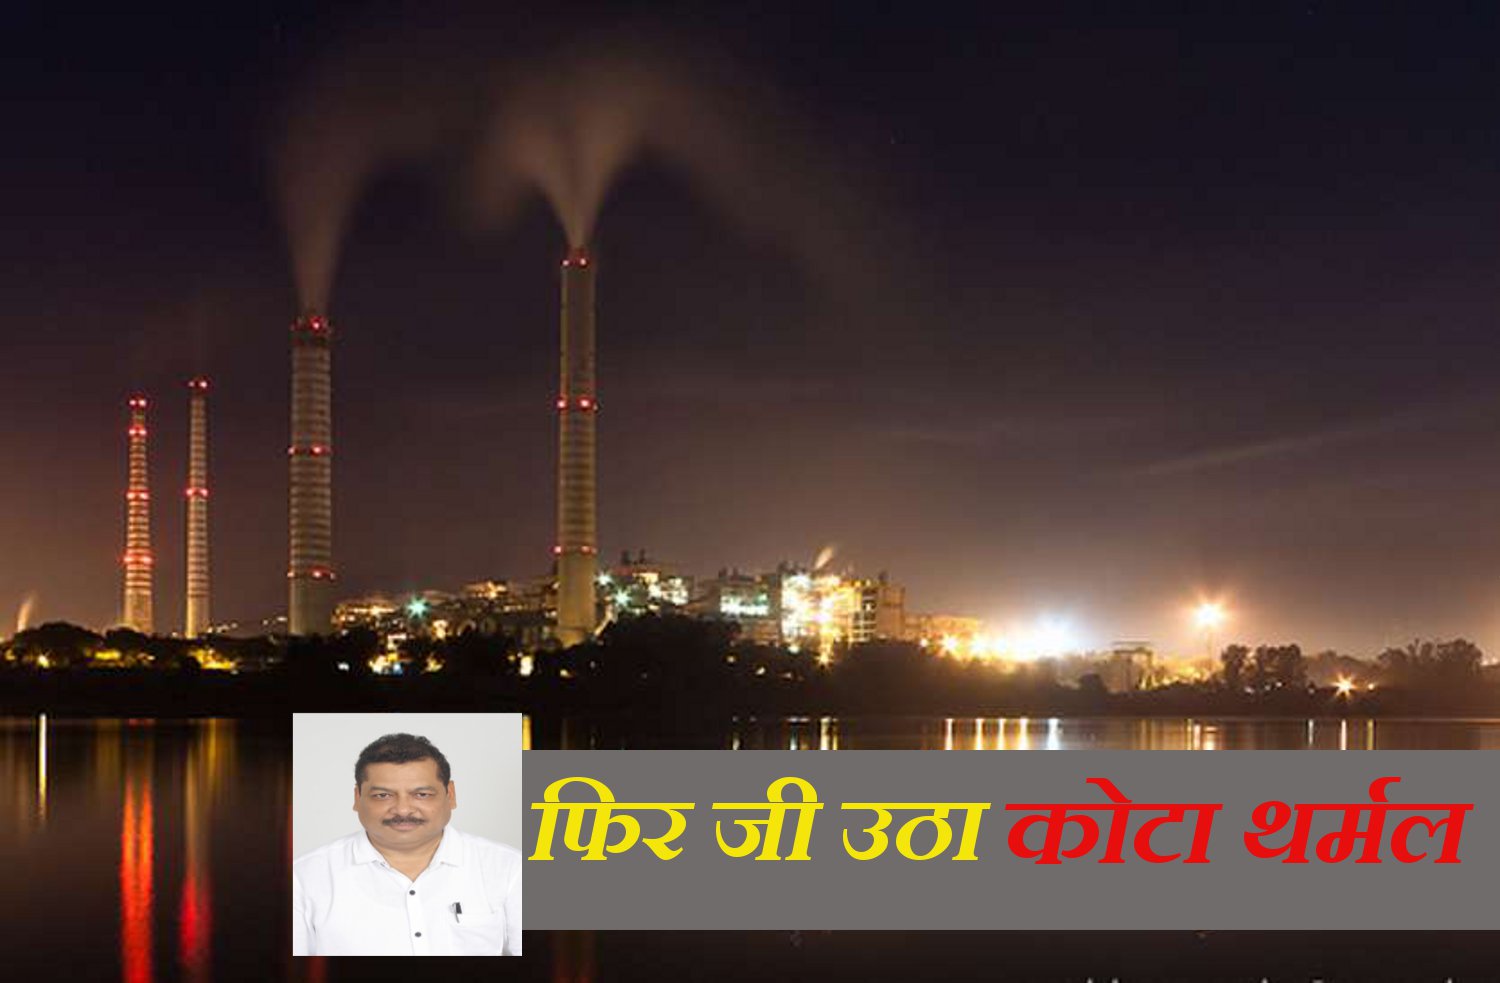 Rajasthan State Pollution Control Board, environment clearance, Kota Thermal, Kota Super Thermal Power Plant, KSTPP, RSPCB, CPCB, CAG, Power Plant in Rajasthan, Power Plant in India, Central electricity authority, Rajasthan Vidyut Utpadan Nigam Limited, RVUNL